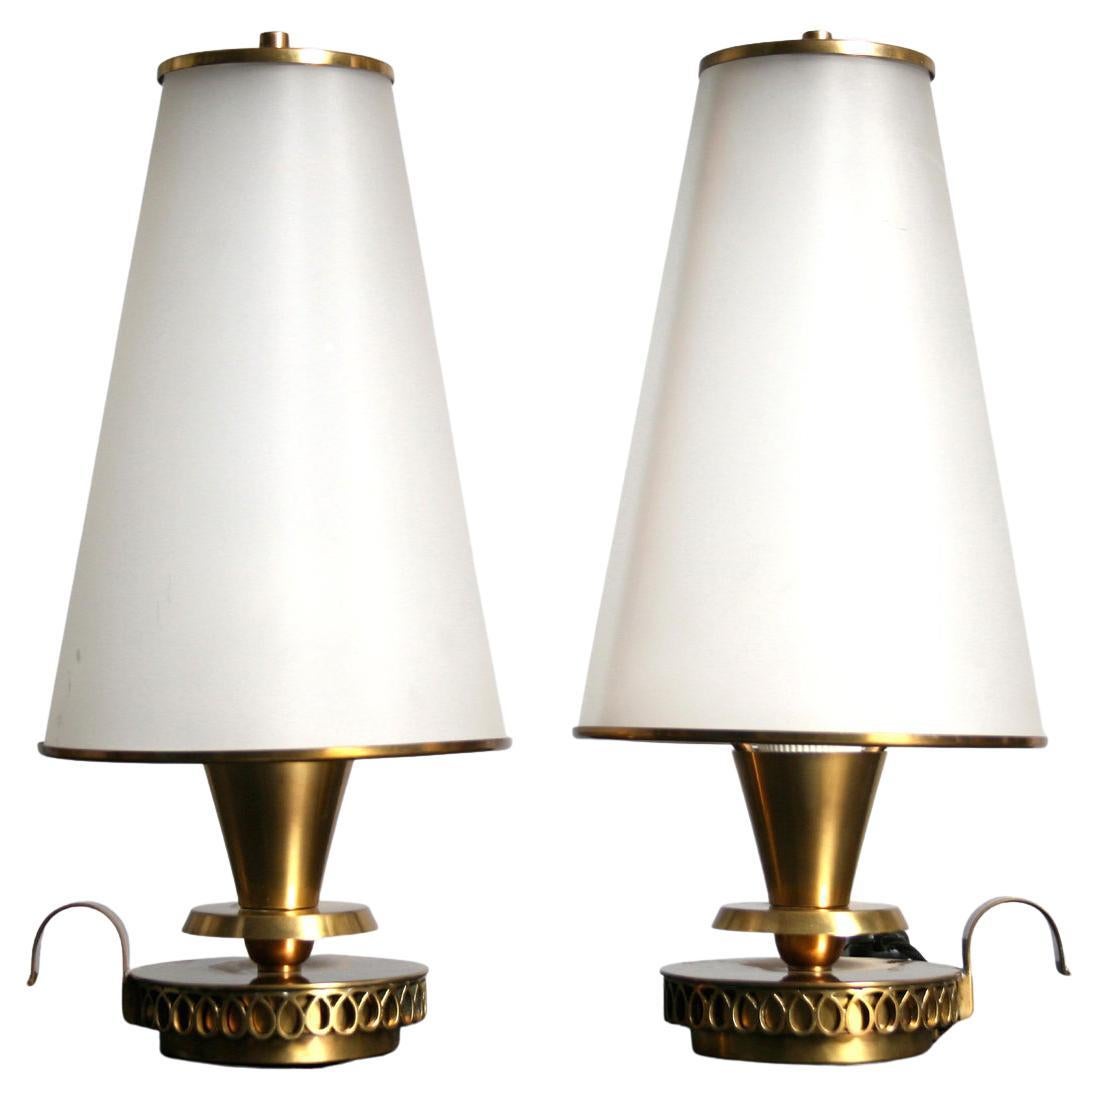 Pair of Mid-Century Modern Table Lamps Attributed to Osvaldo Borsani For Sale